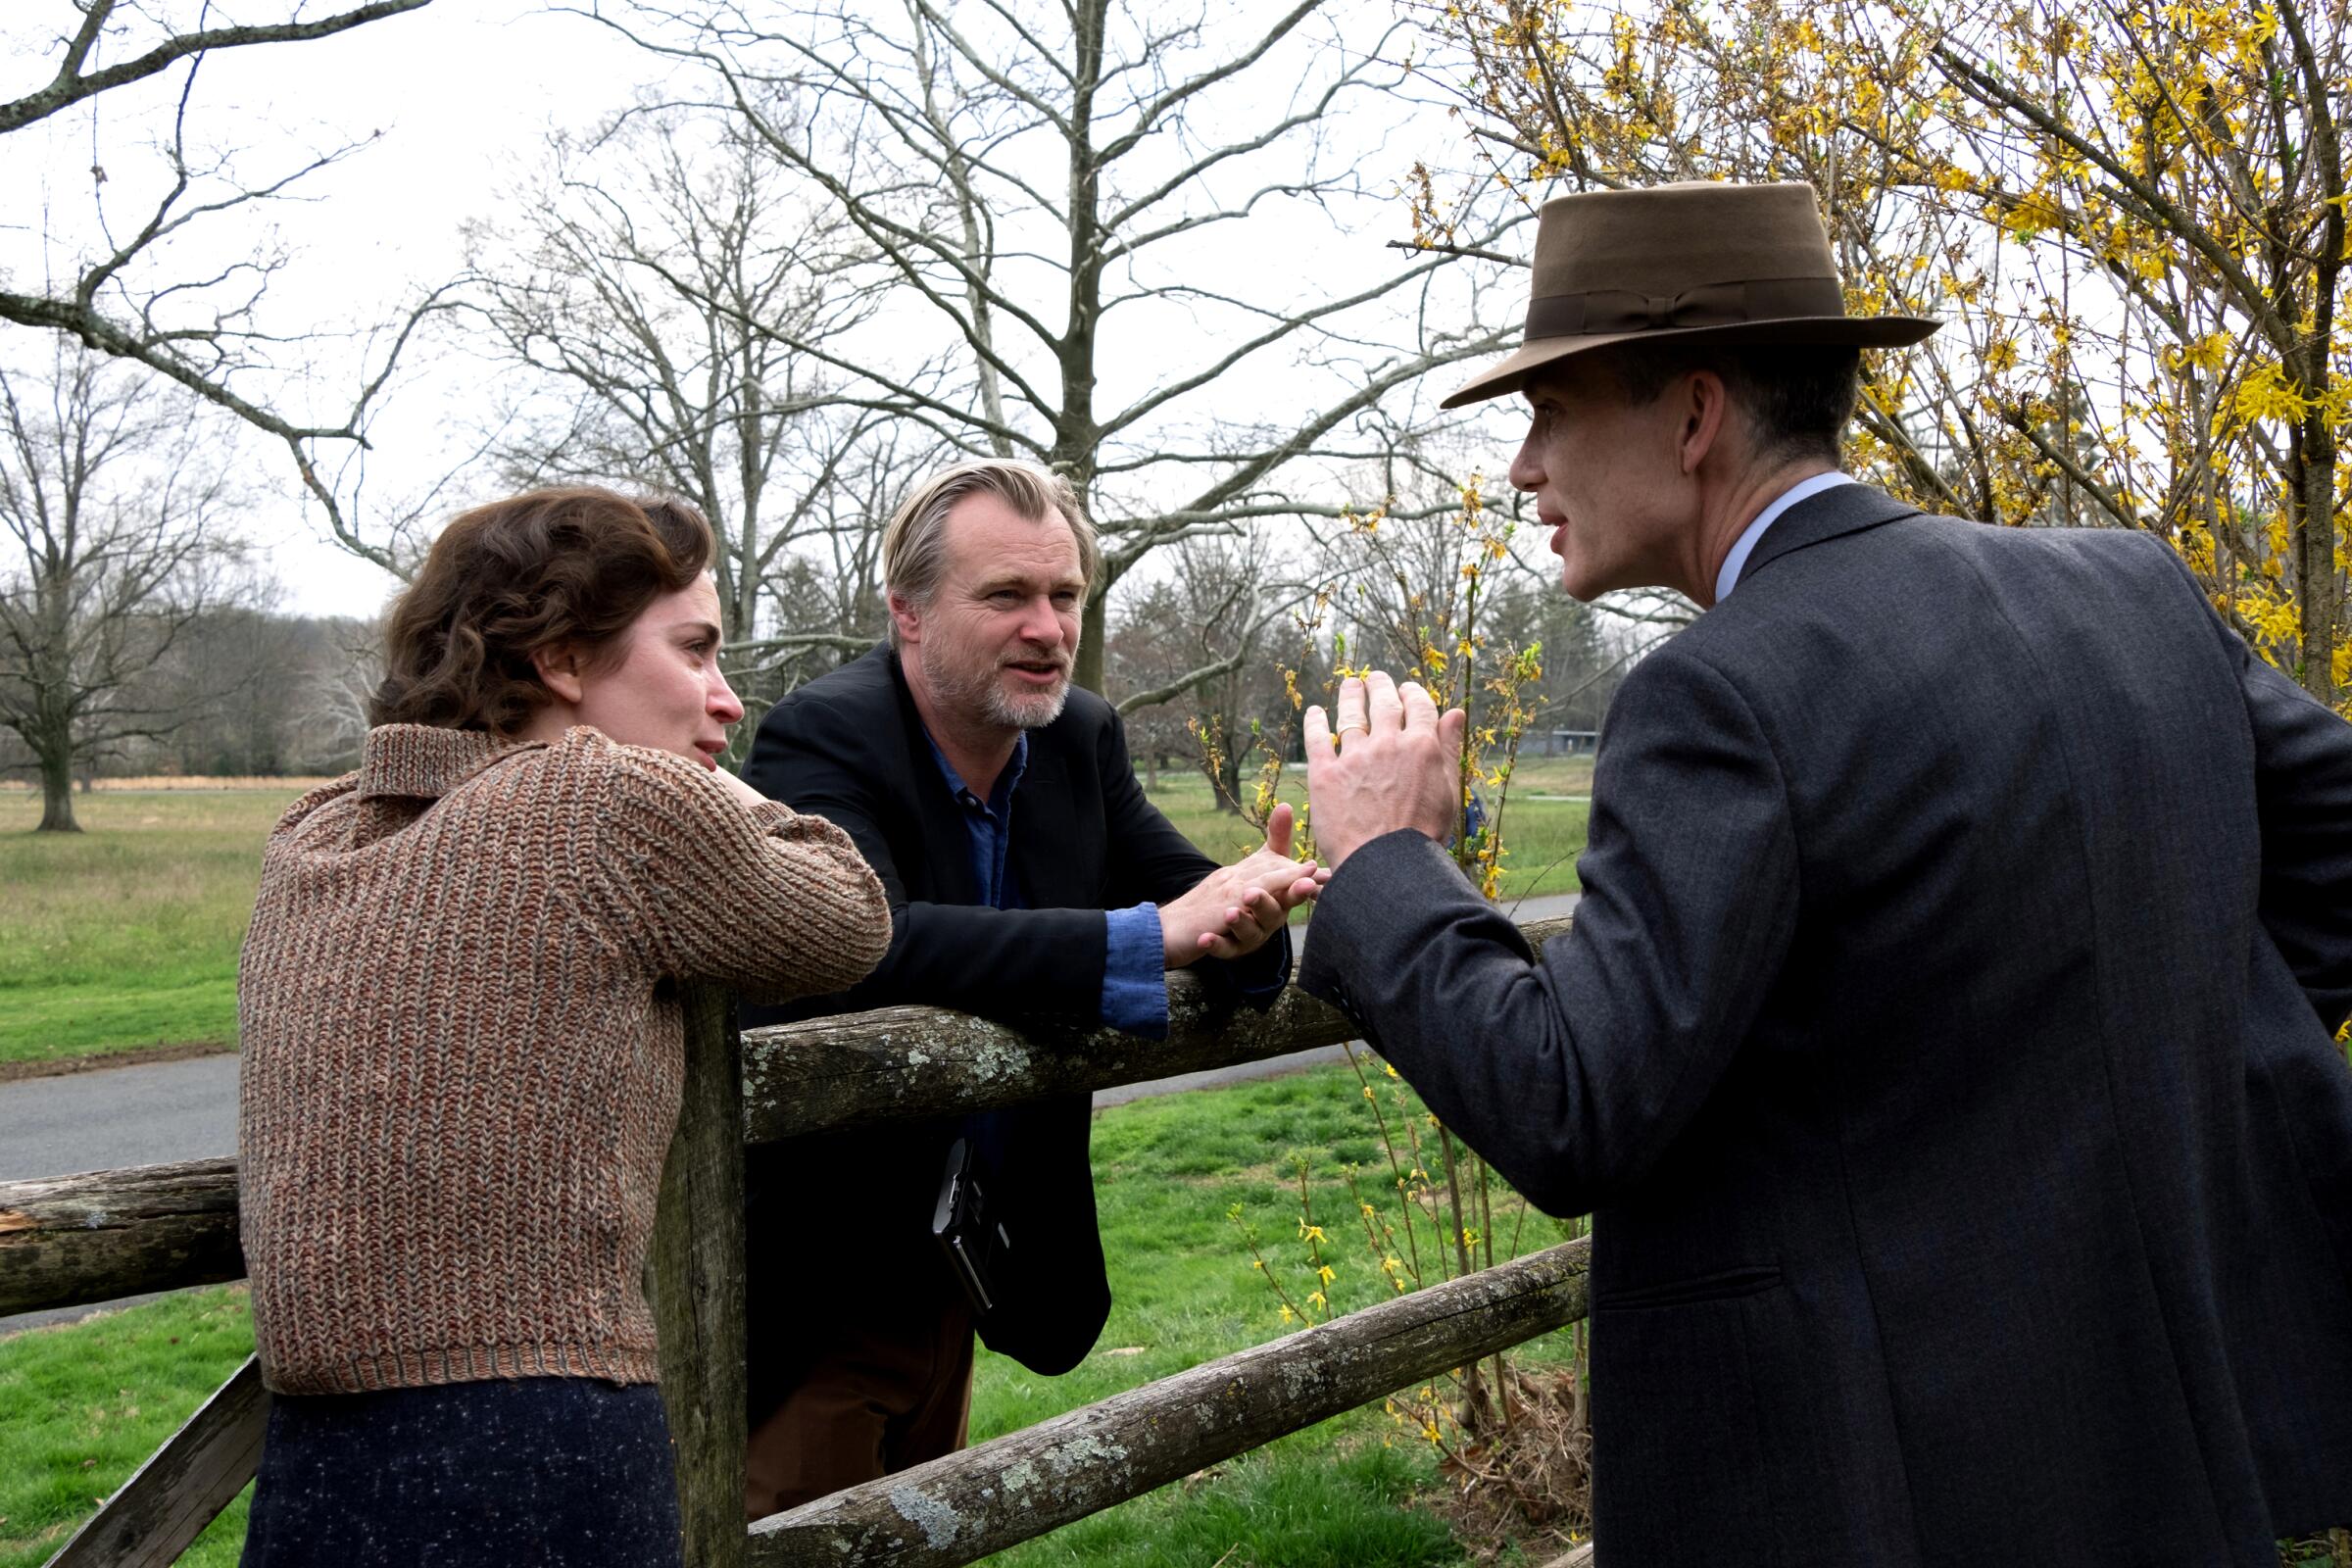 Emily Blunt, Christopher Nolan and Cillian Murphy on the set of "Oppenheimer."